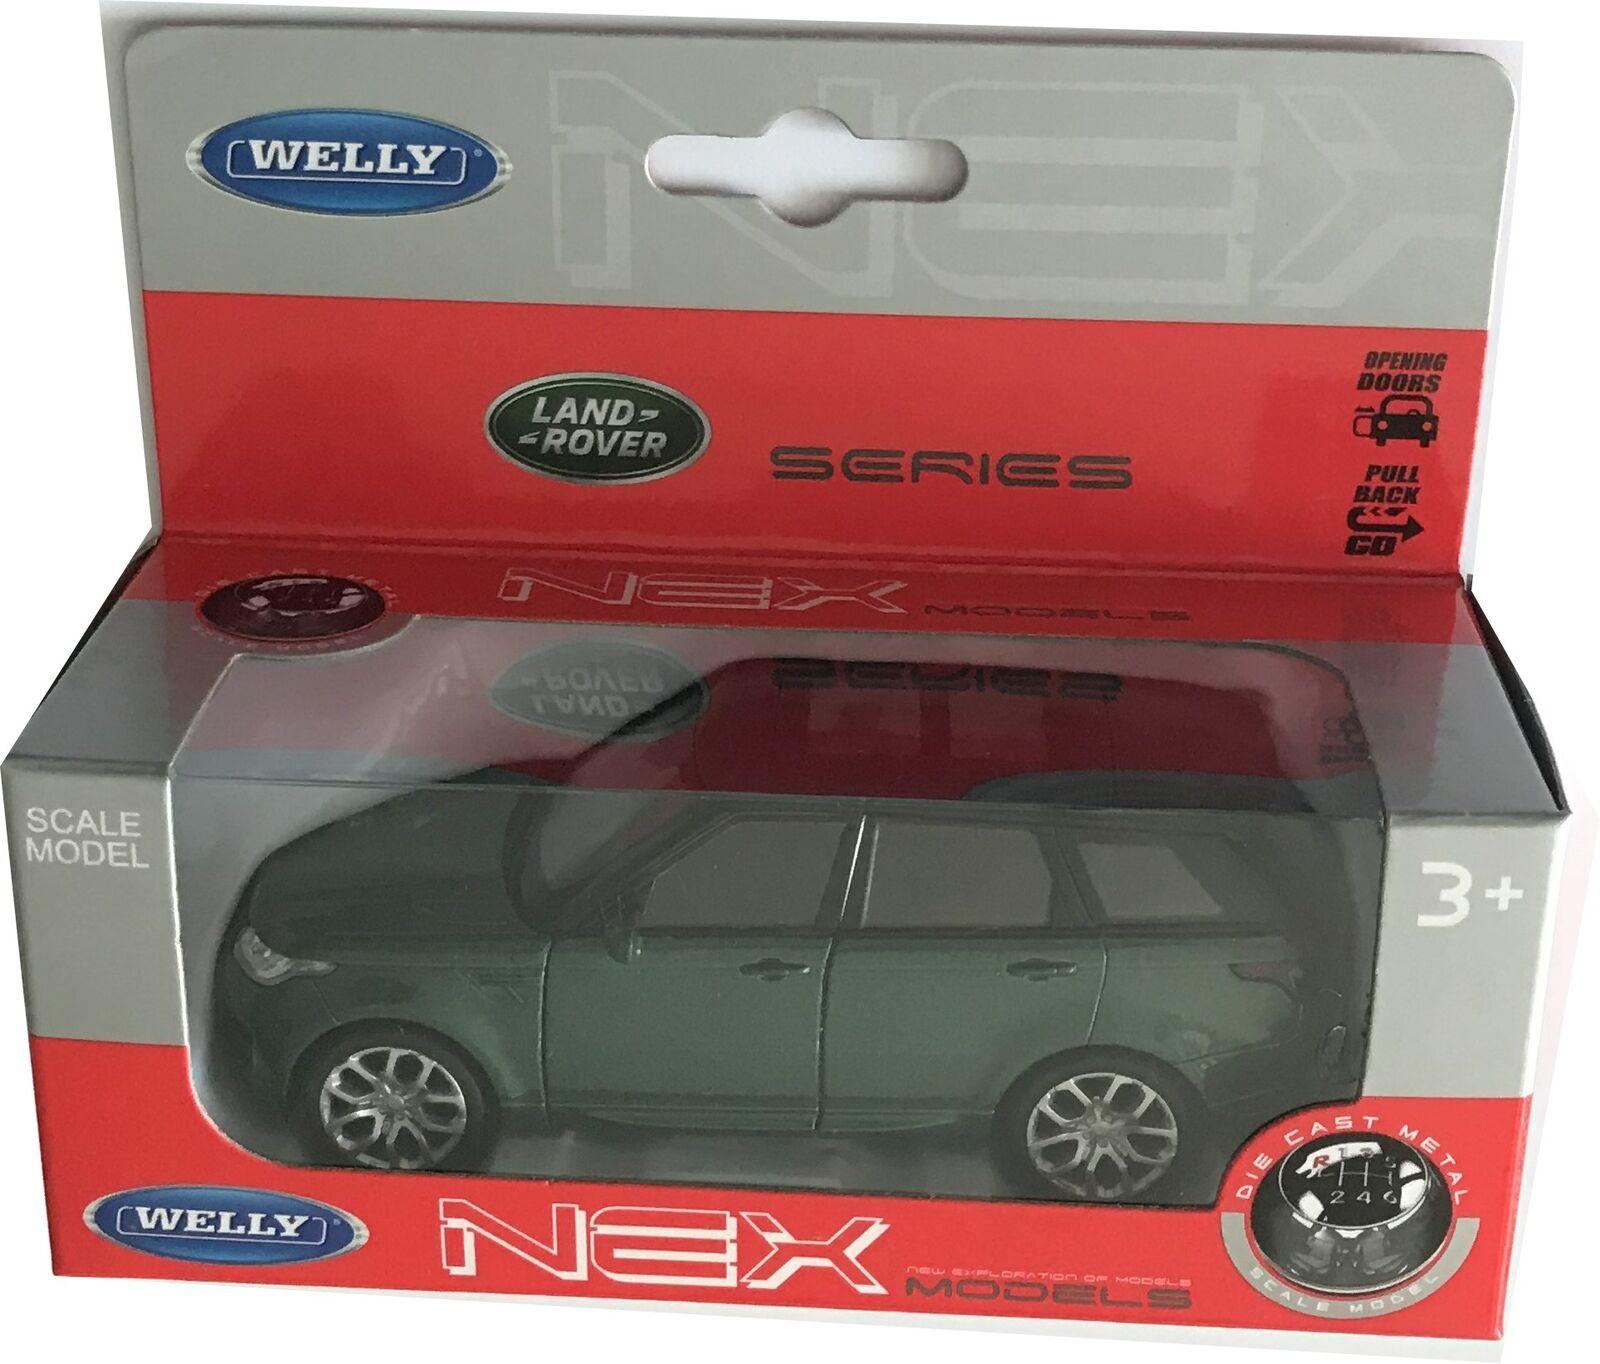 Range Rover Sport, metallic green with black roof, 1:34-1:39 scale model, welly